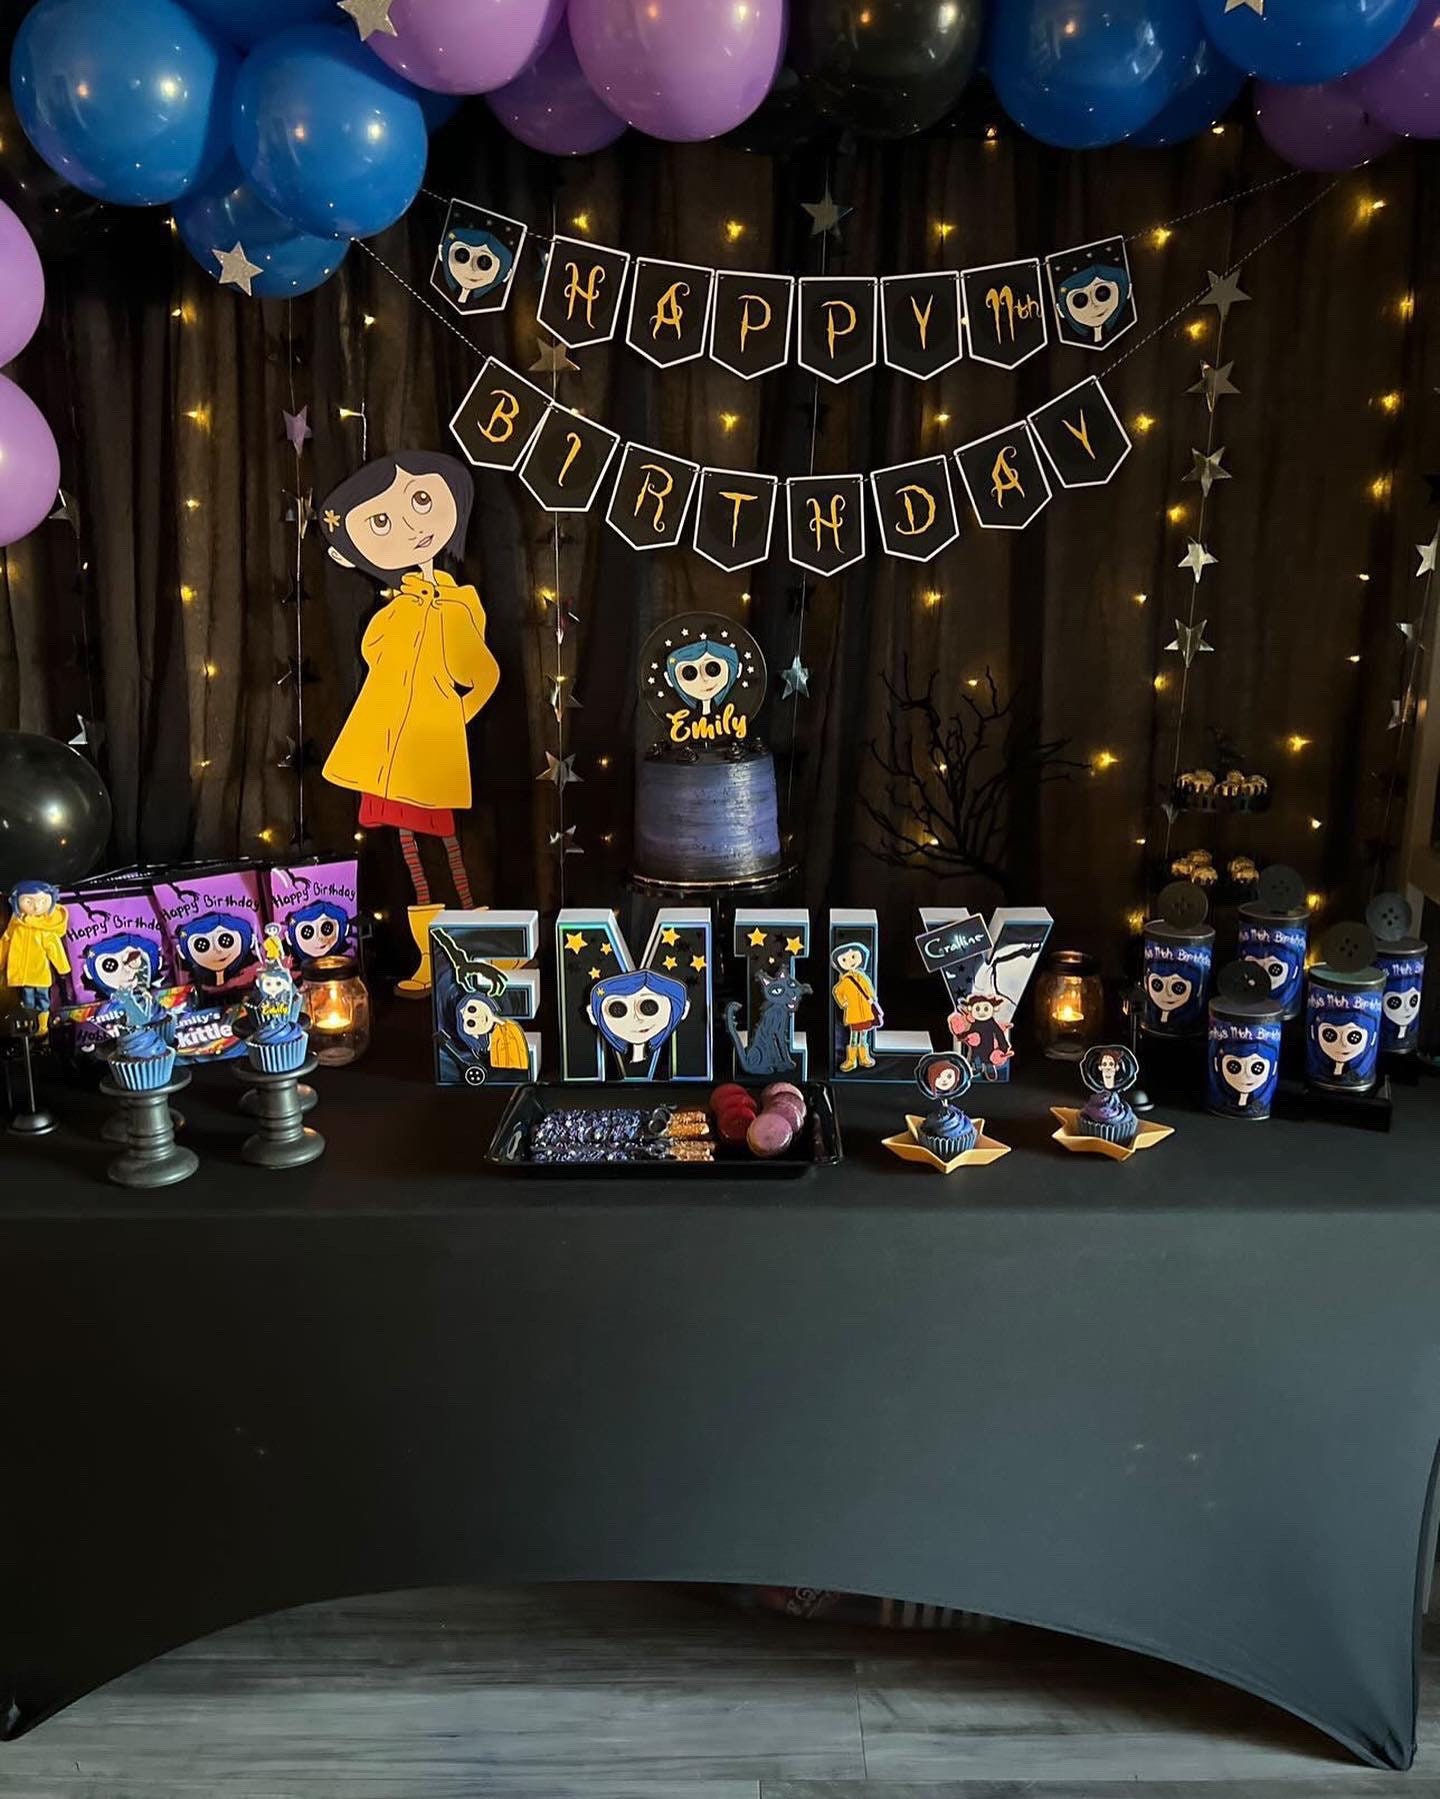 Coraline Birthday Party Decorations Include 25pcs Cake Topper and Cupcake Toppers Sets for Coraline Birthday Party Supplies